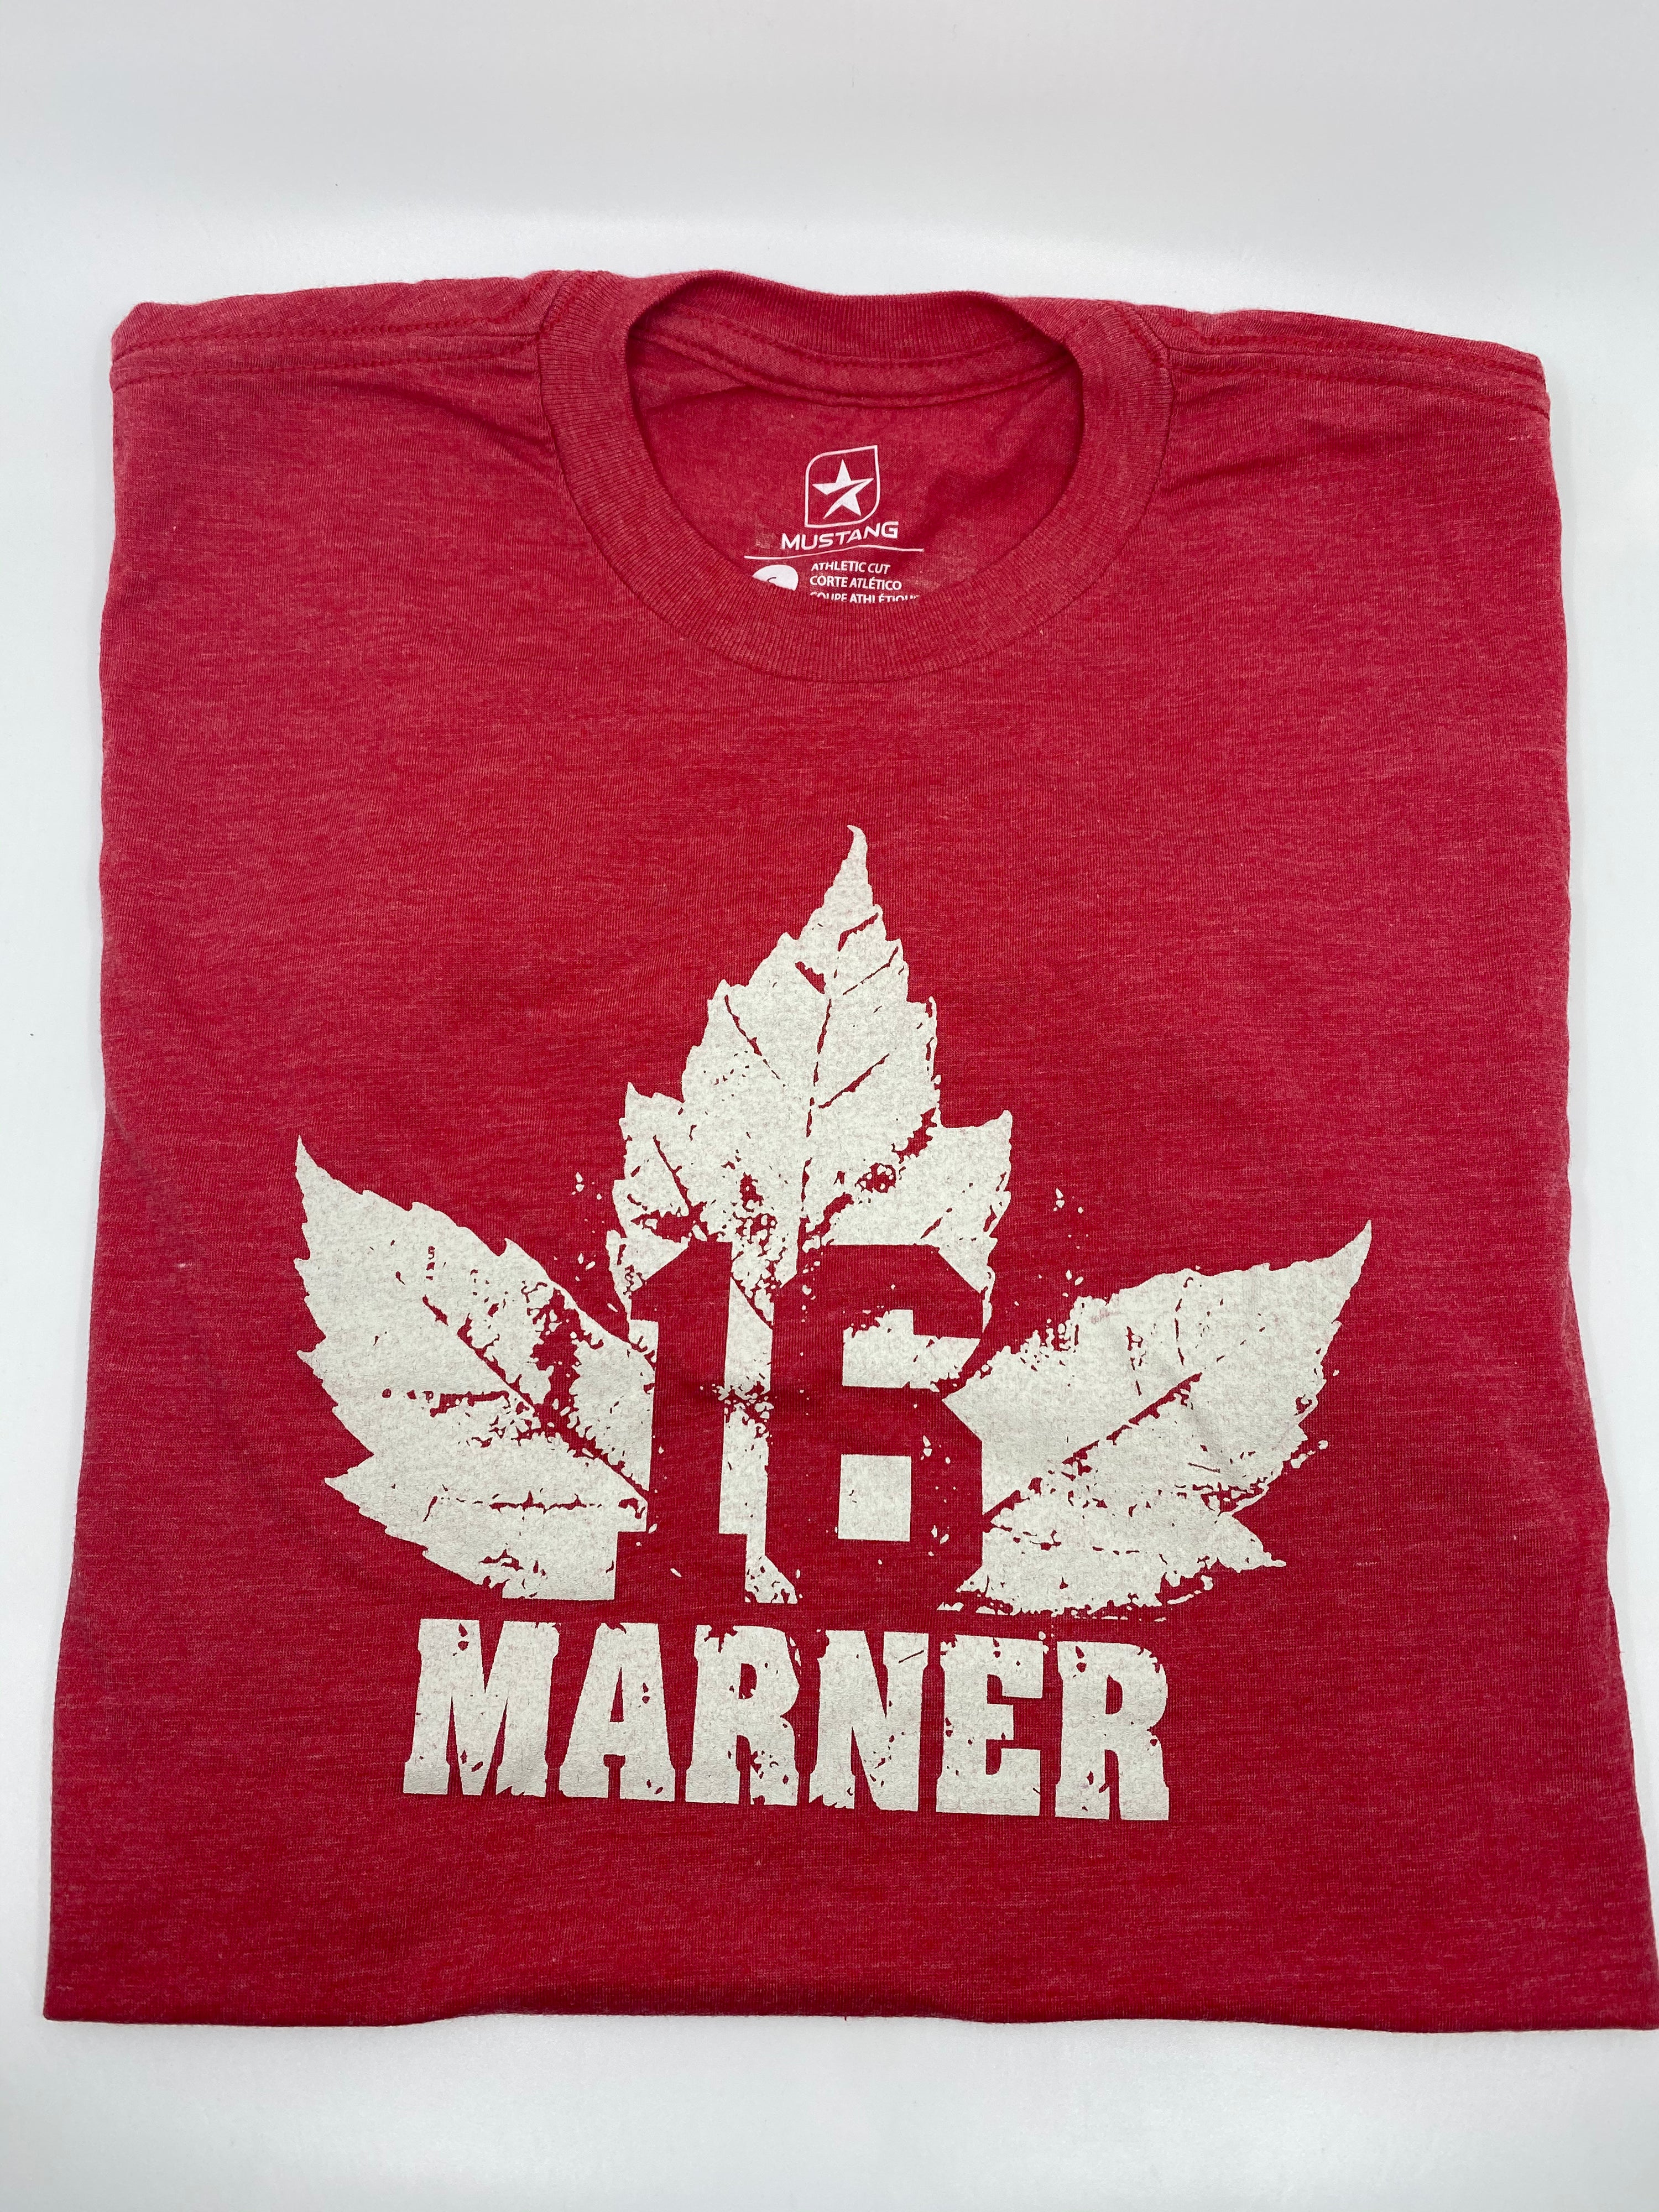 Marner "16" Red T Shirt